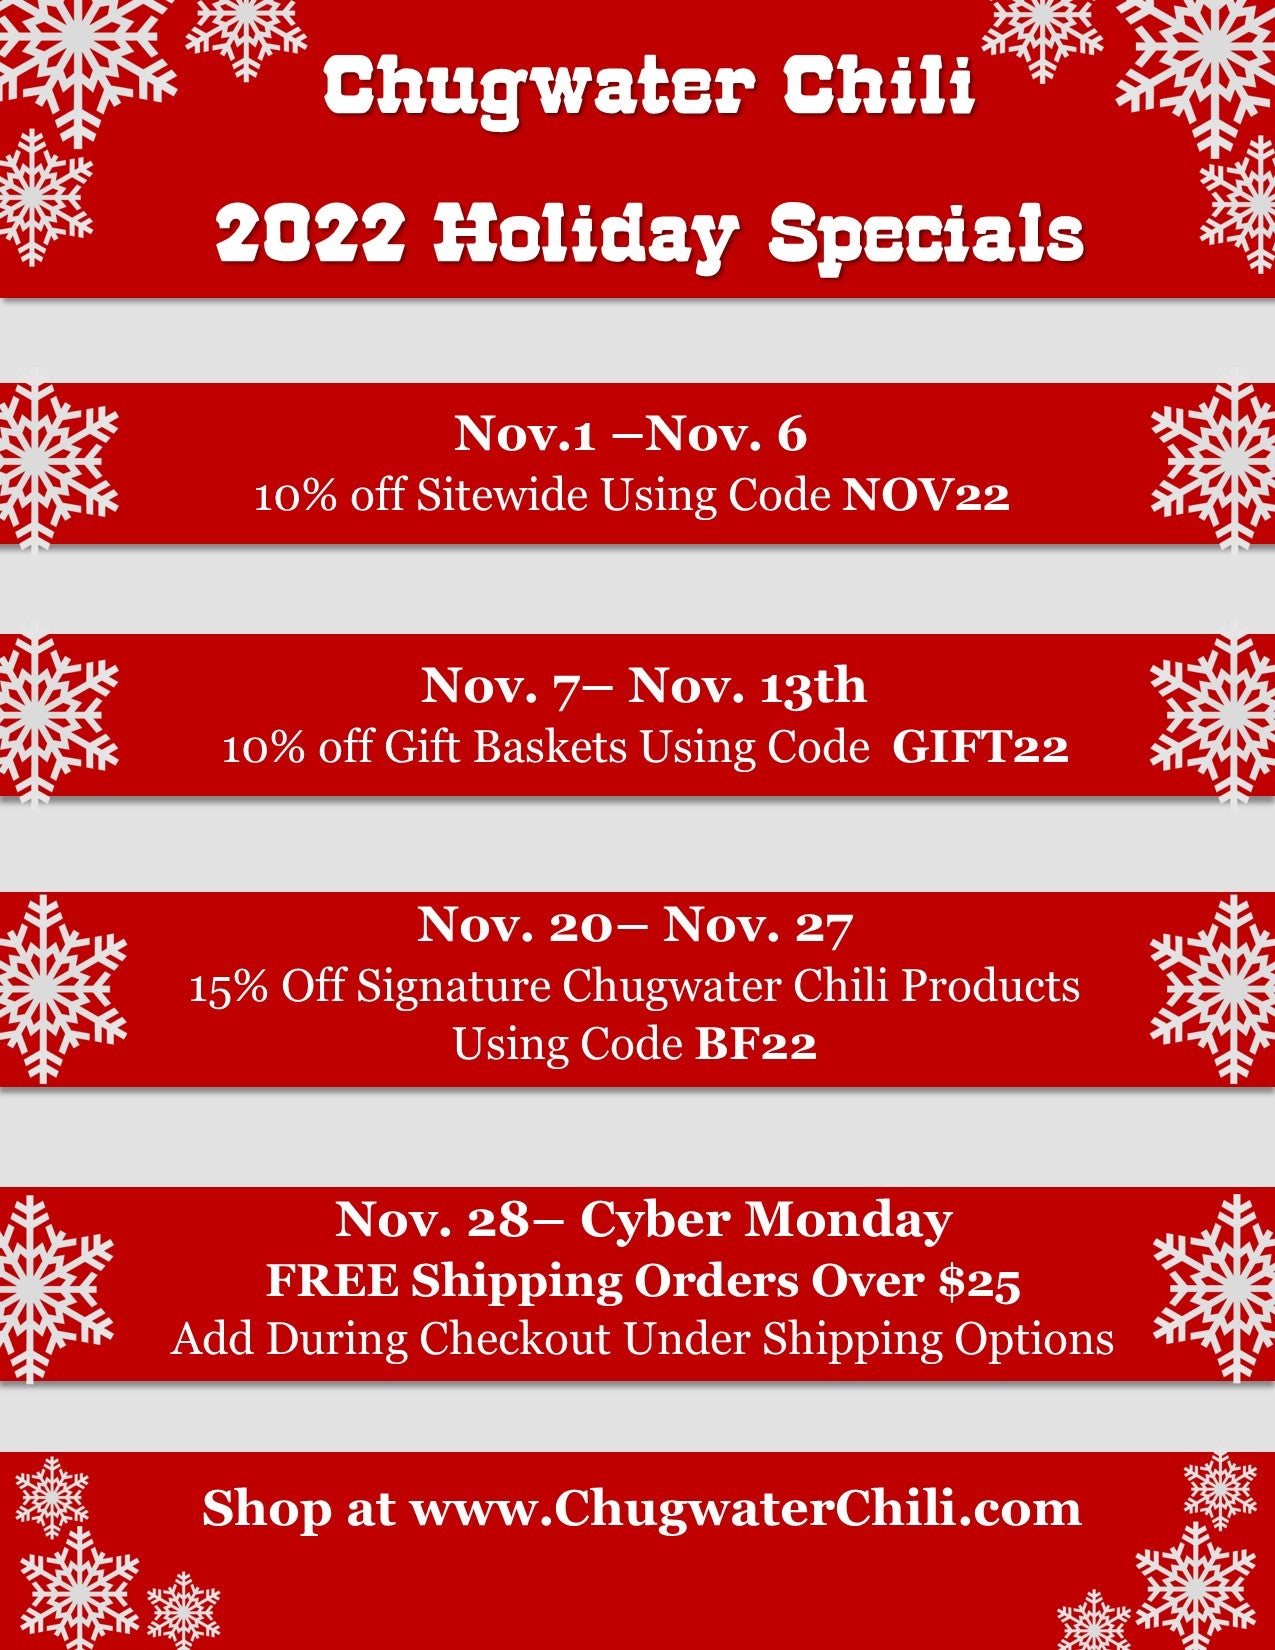 November: A Whole Month of Deals!!!